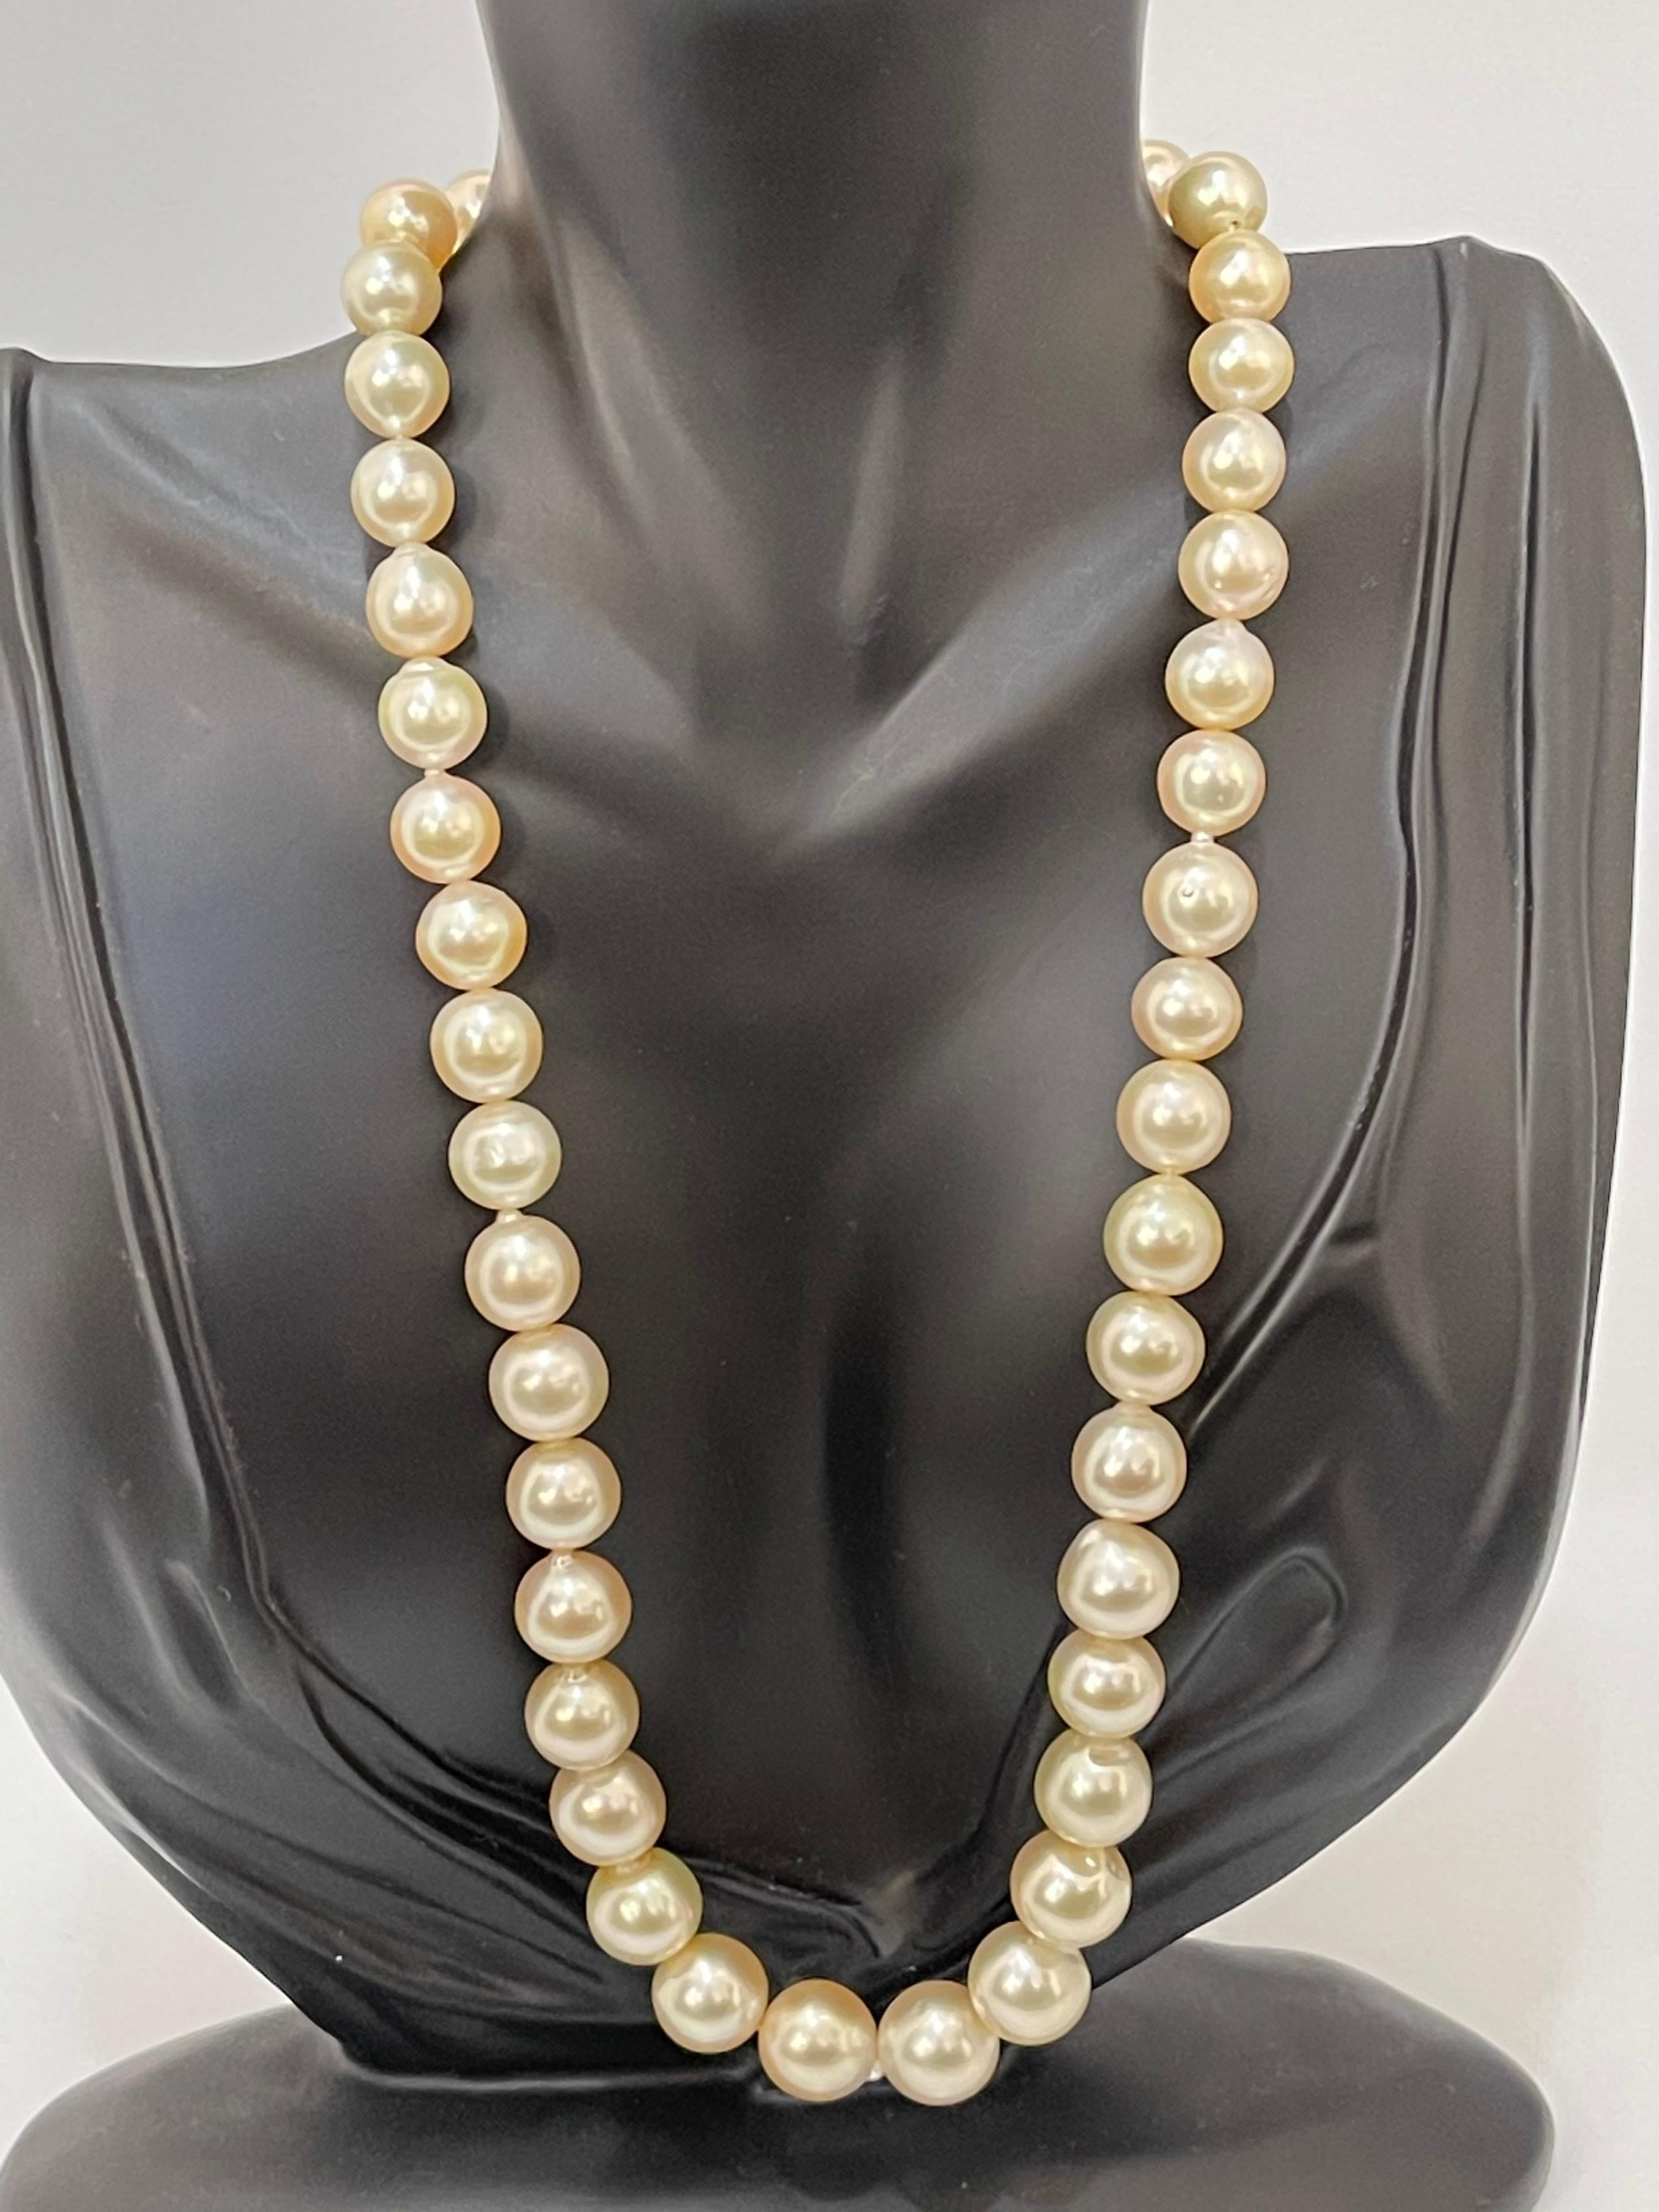 Graduating Cream Color South Sea Pearls Necklace 14 Karat Yellow Gold Clasp For Sale 4